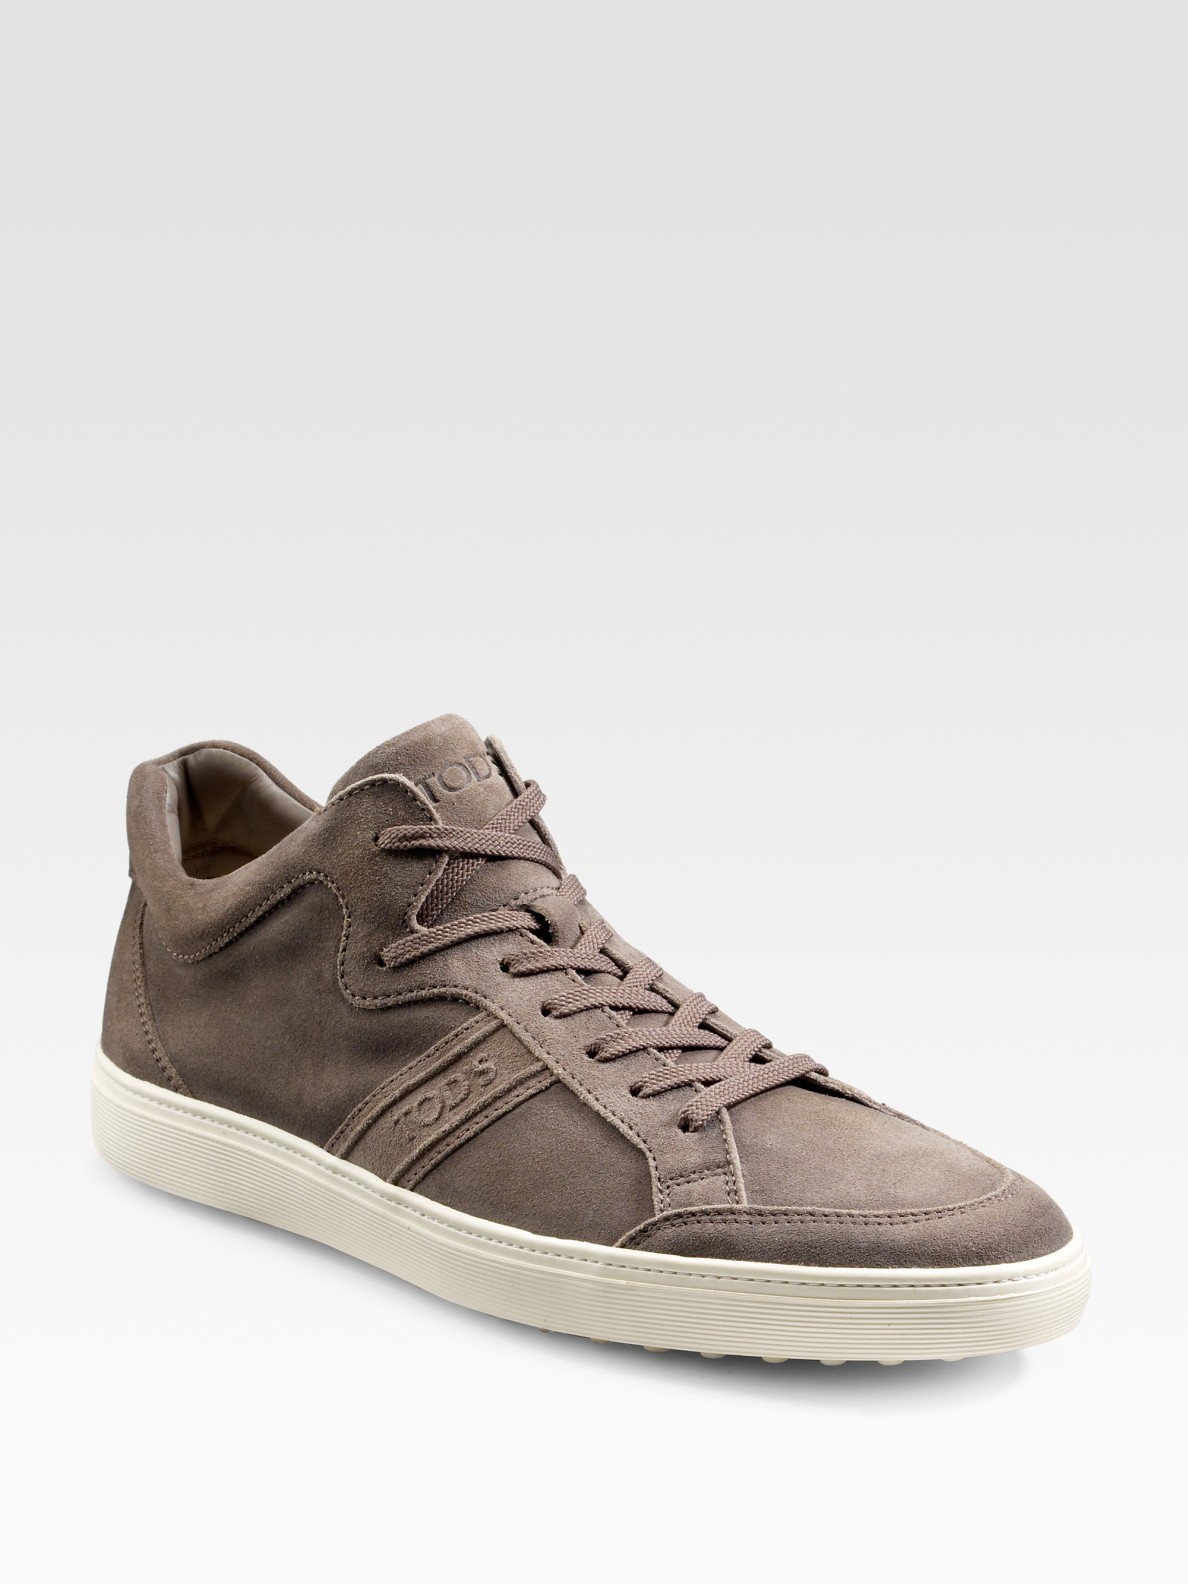 Tod's Polacco Sport Cassetta Sneakers/suede in Brown (Natural) for Men -  Lyst